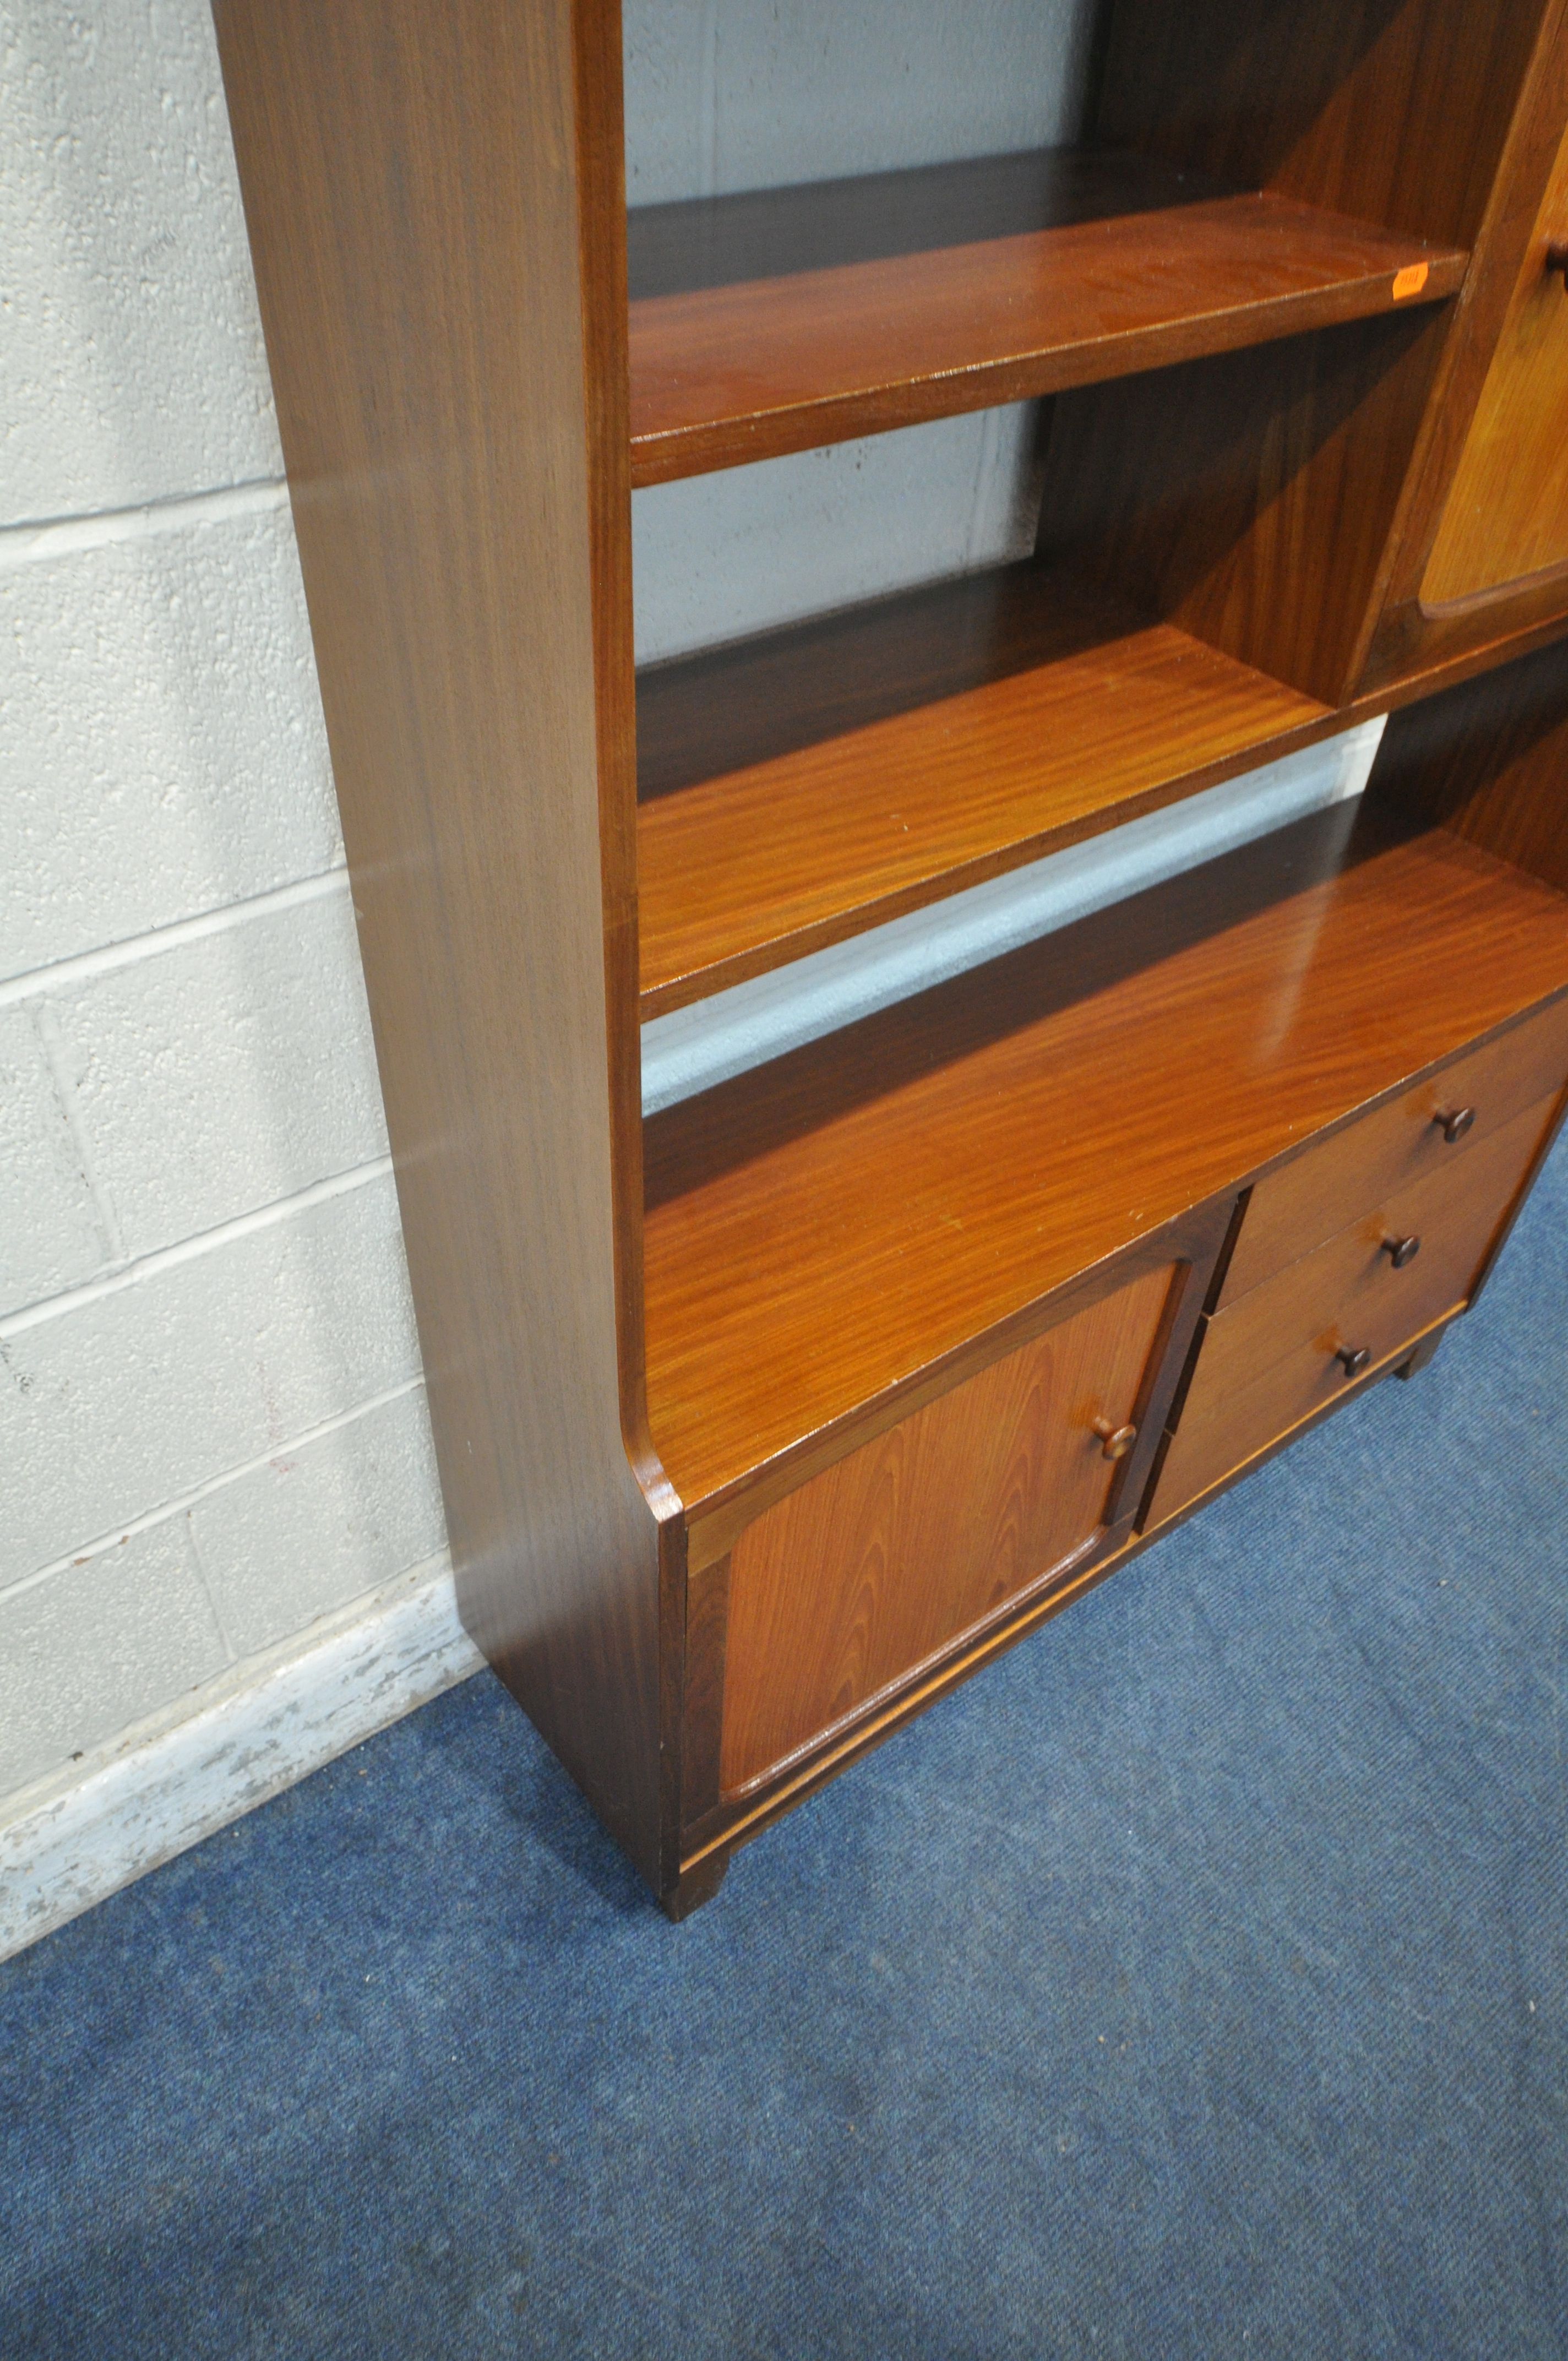 STATEROOM BY STONEHILL, A MID CENTURY TEAK BOOKCASE, with double glazed sliding doors, an - Image 3 of 5